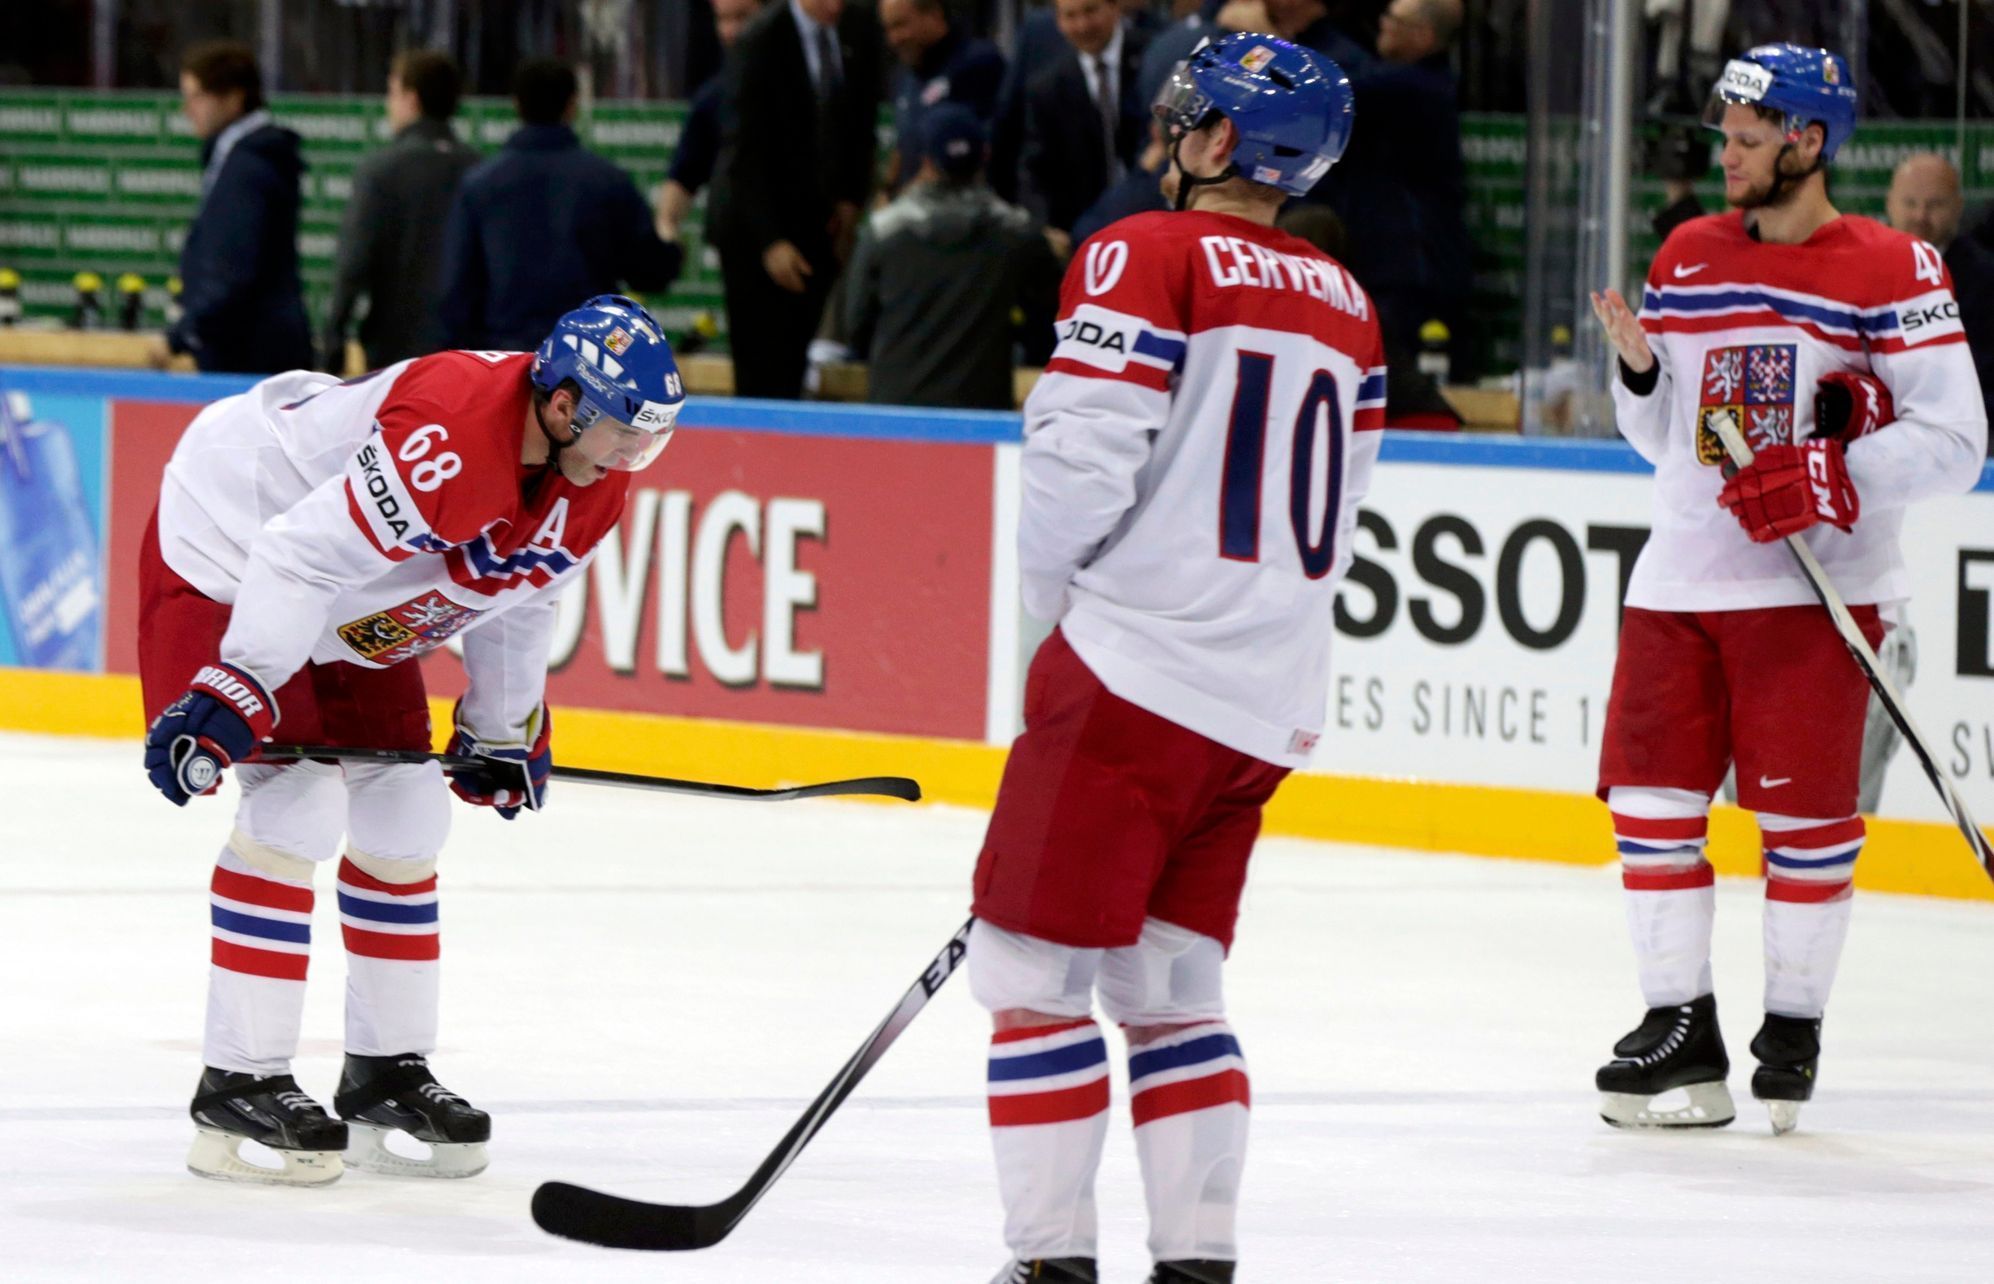 Jagr, Cervenka and Jordan of the Czech Republic react after loosing their Ice Hockey World Championship third-place game against the U.S. at the O2 arena in Prague